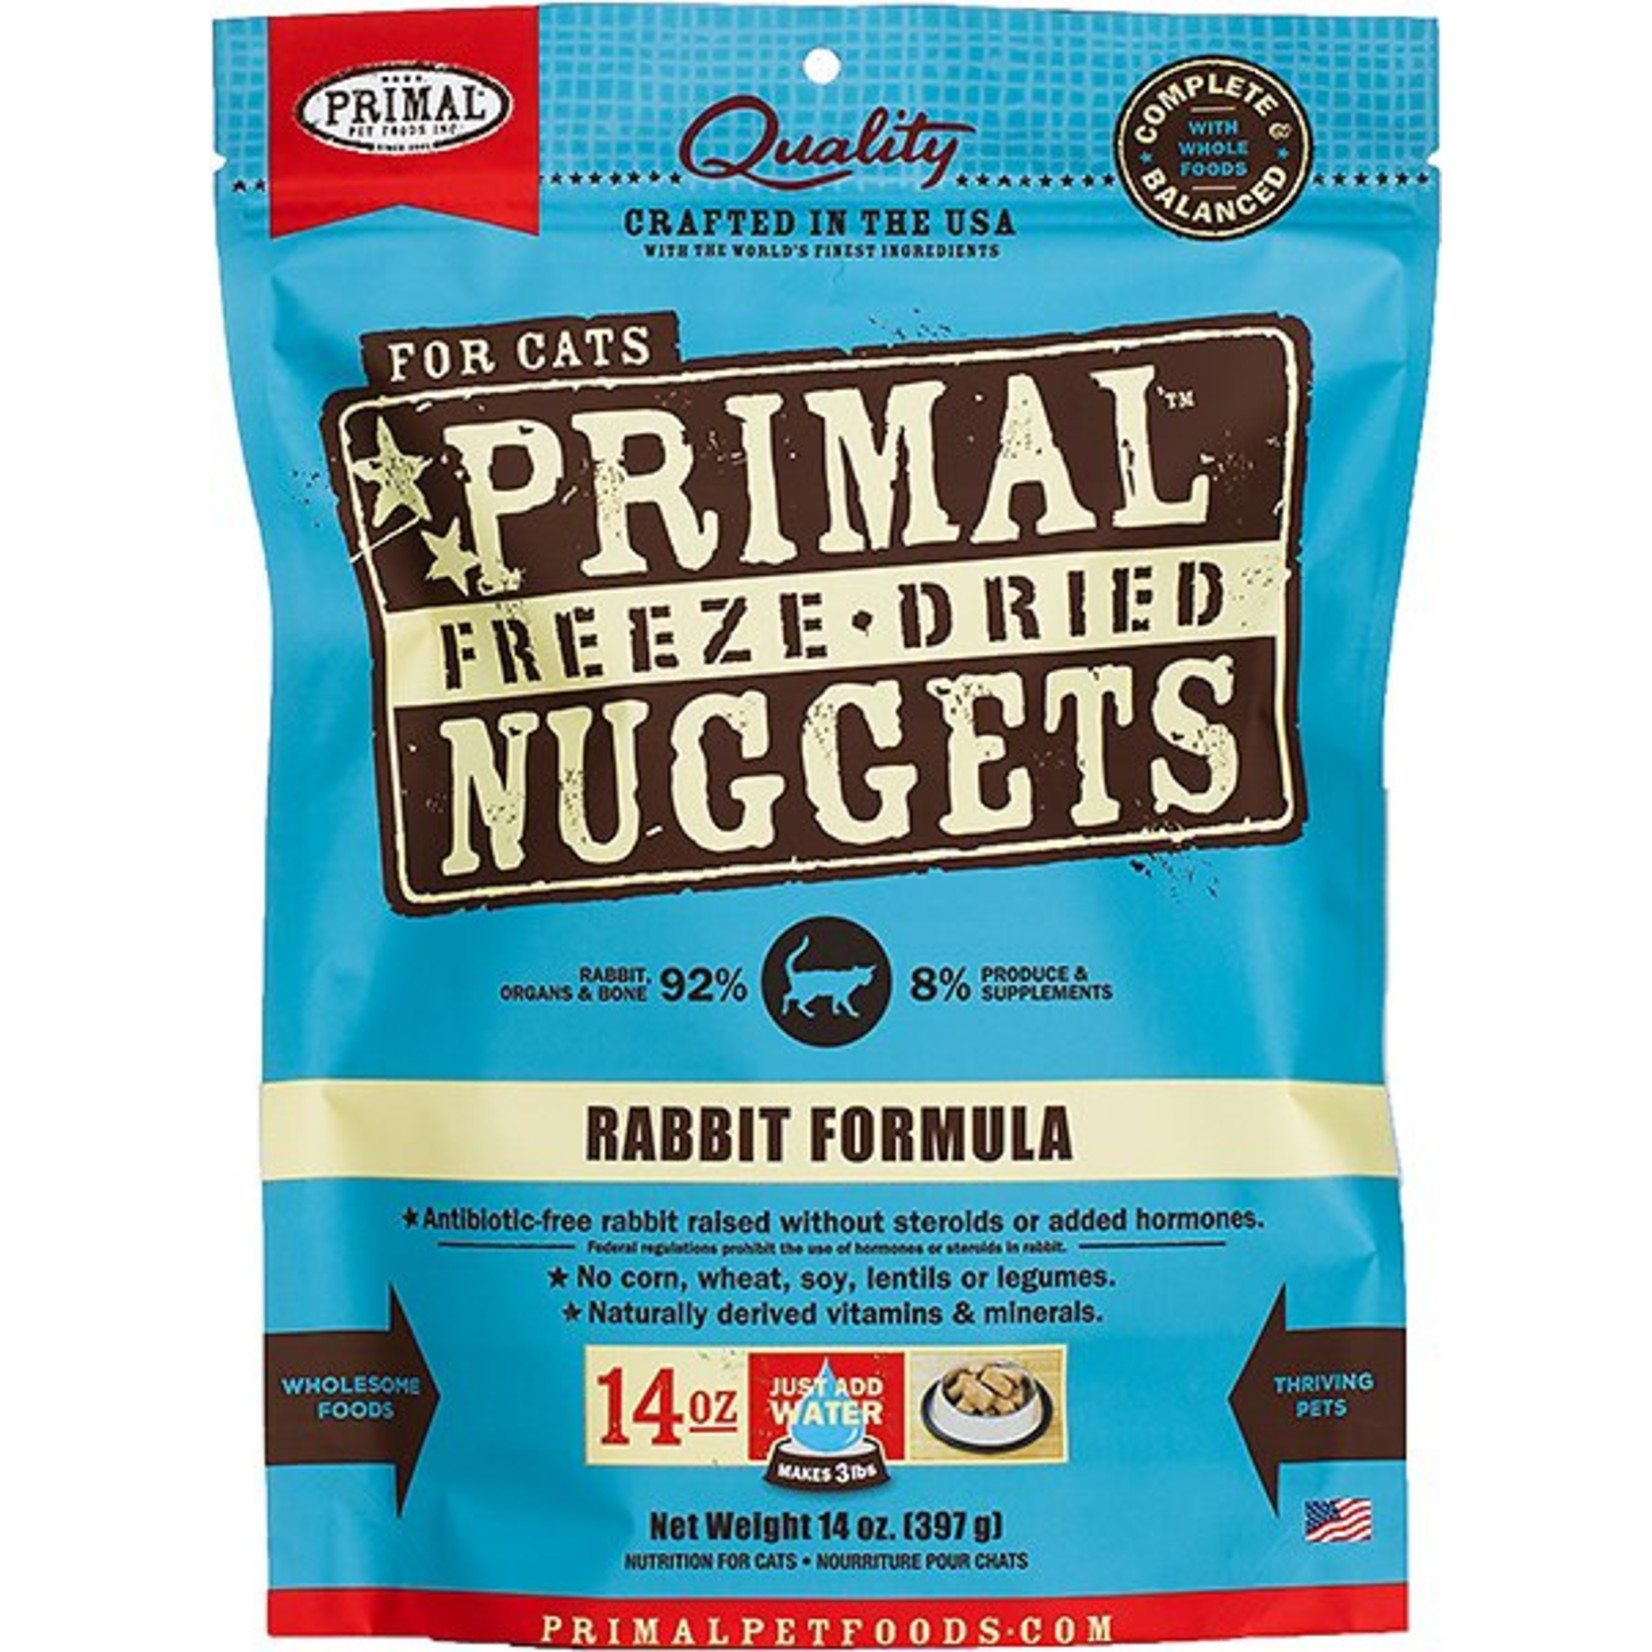 Primal Pet Foods Primal Freeze-Dried Nuggets - Rabbit Formula for Cats